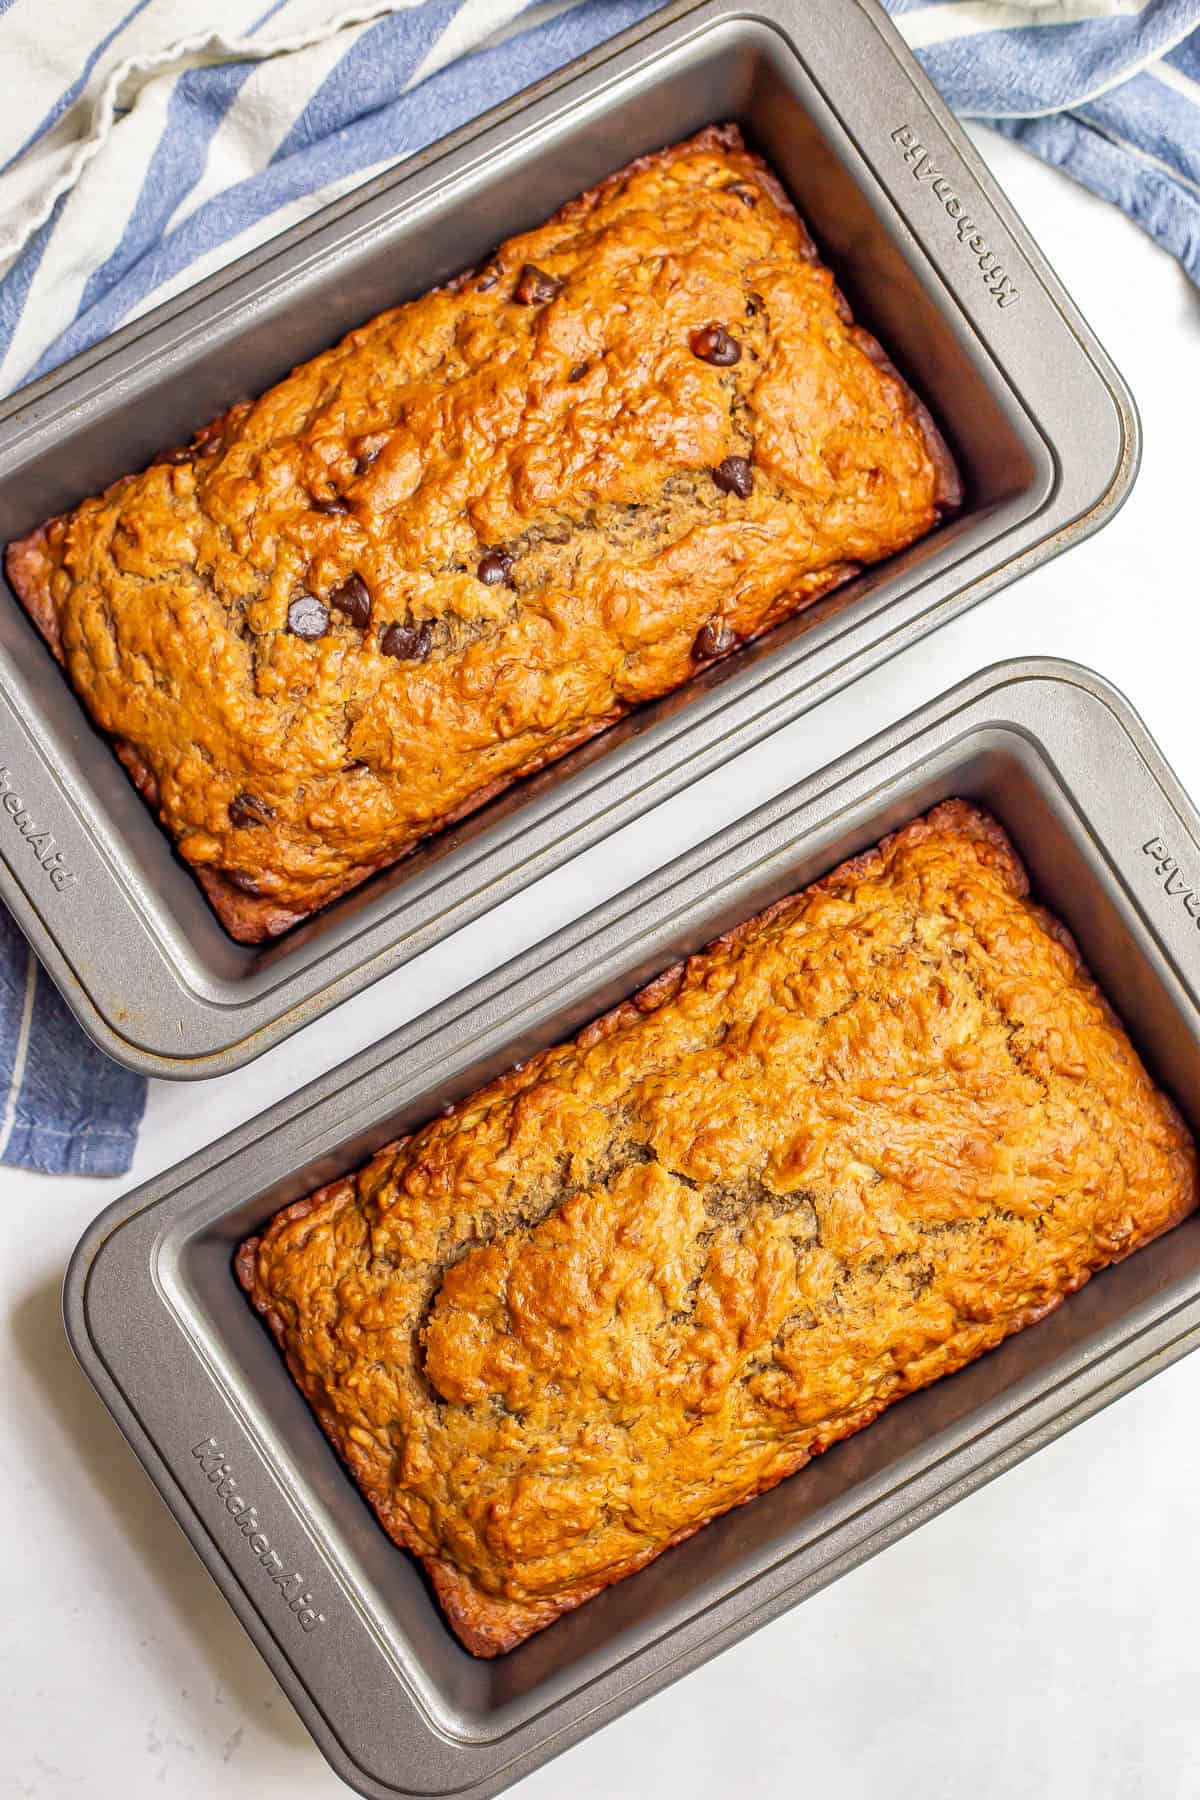 Two baked loaves of healthy banana bread, one with chocolate chips, in pans.